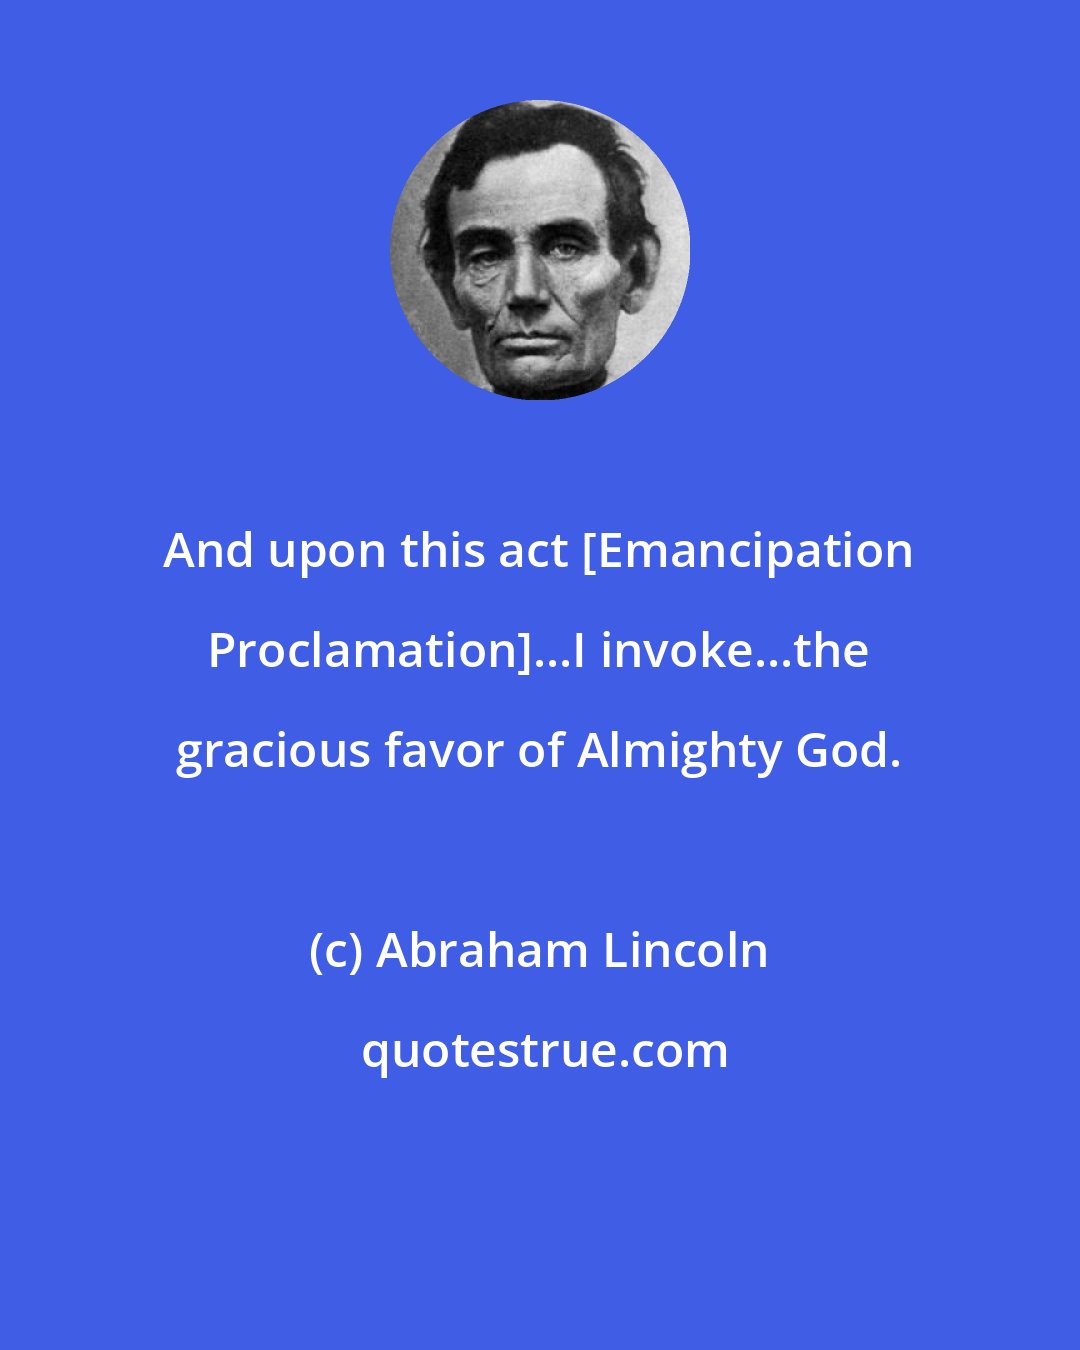 Abraham Lincoln: And upon this act [Emancipation Proclamation]...I invoke...the gracious favor of Almighty God.